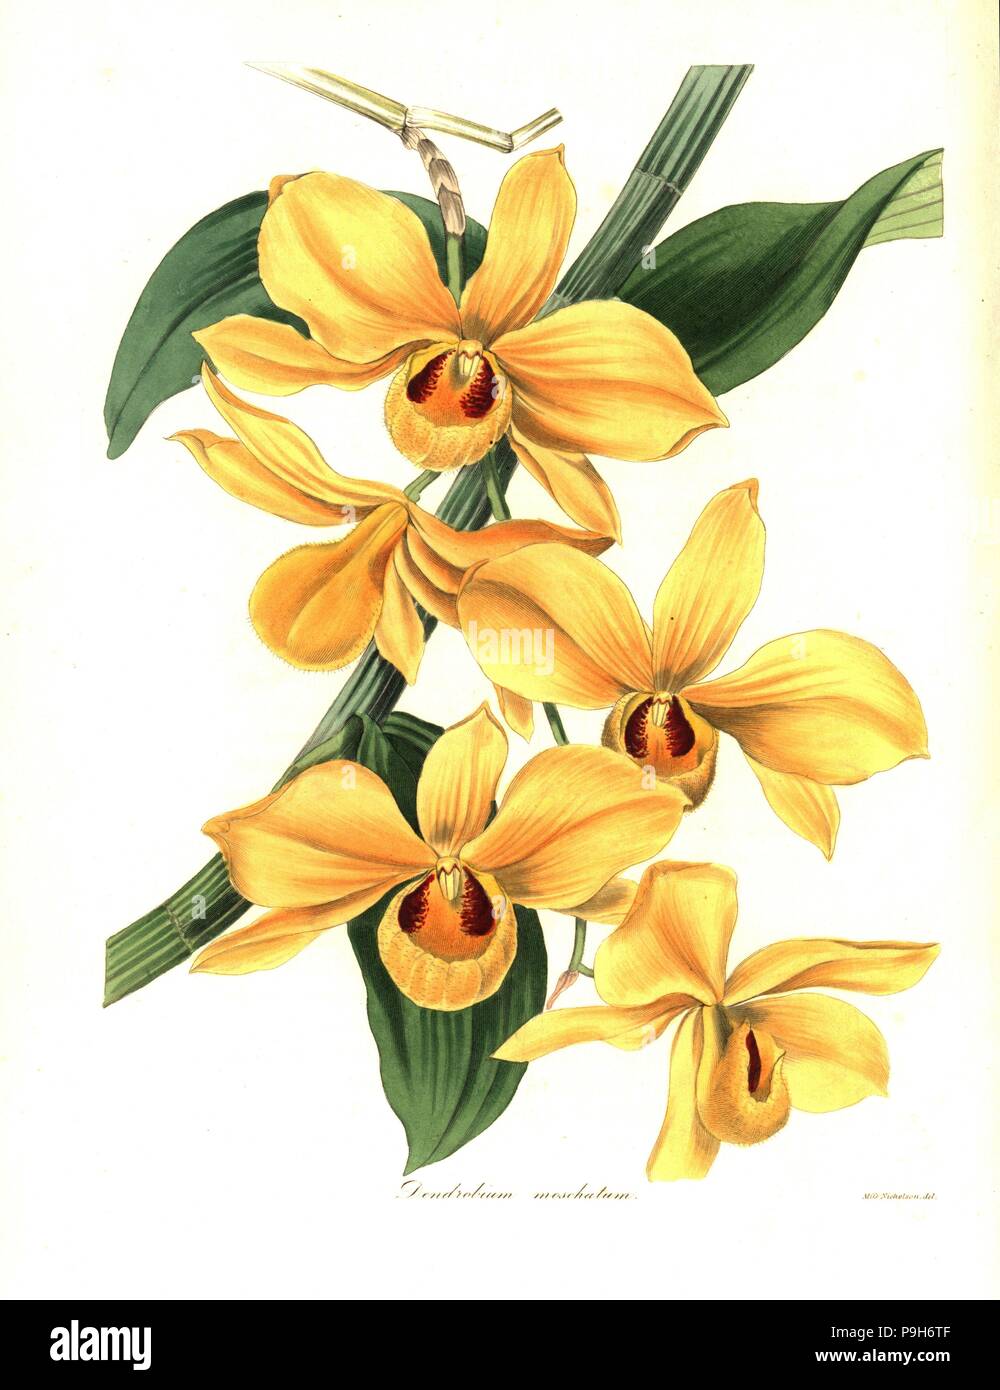 Musk-scented dendrobium orchid, Dendrobium moschatum. Handcoloured copperplate engraving after a botanical illustration by Miss Nicholson from Benjamin Maund and the Rev. John Stevens Henslow's The Botanist, London, 1836. Stock Photo